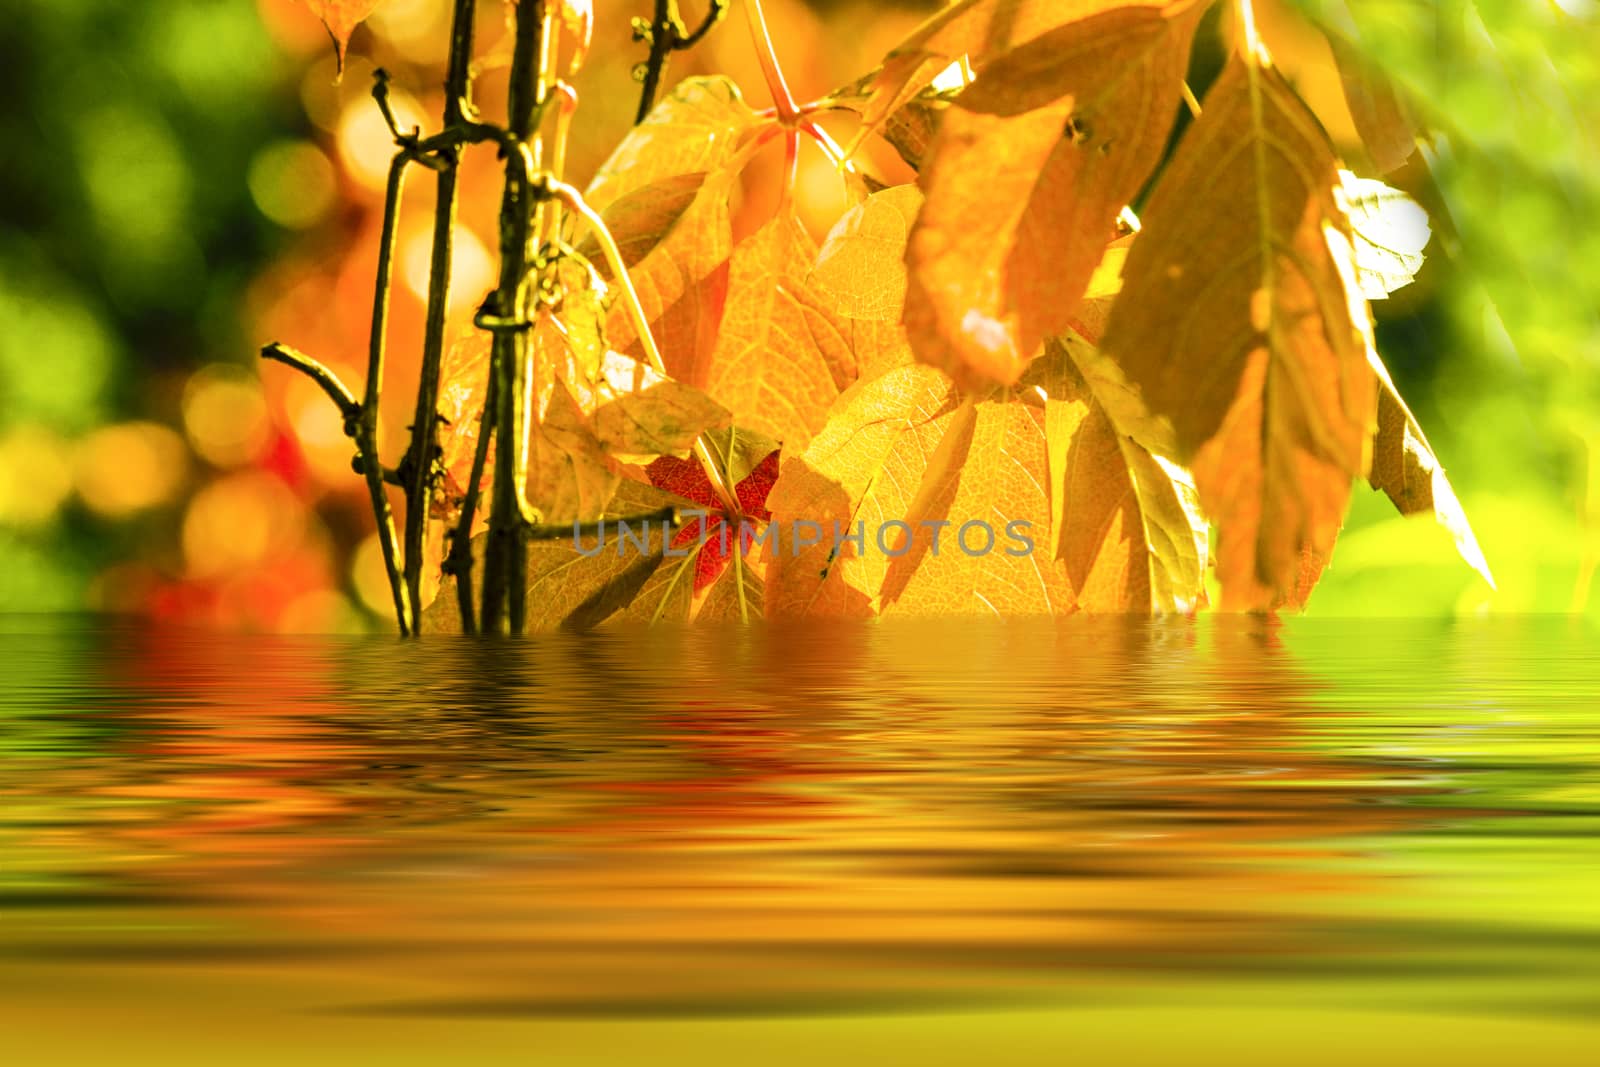 Autumn leaves in the sun by Fr@nk